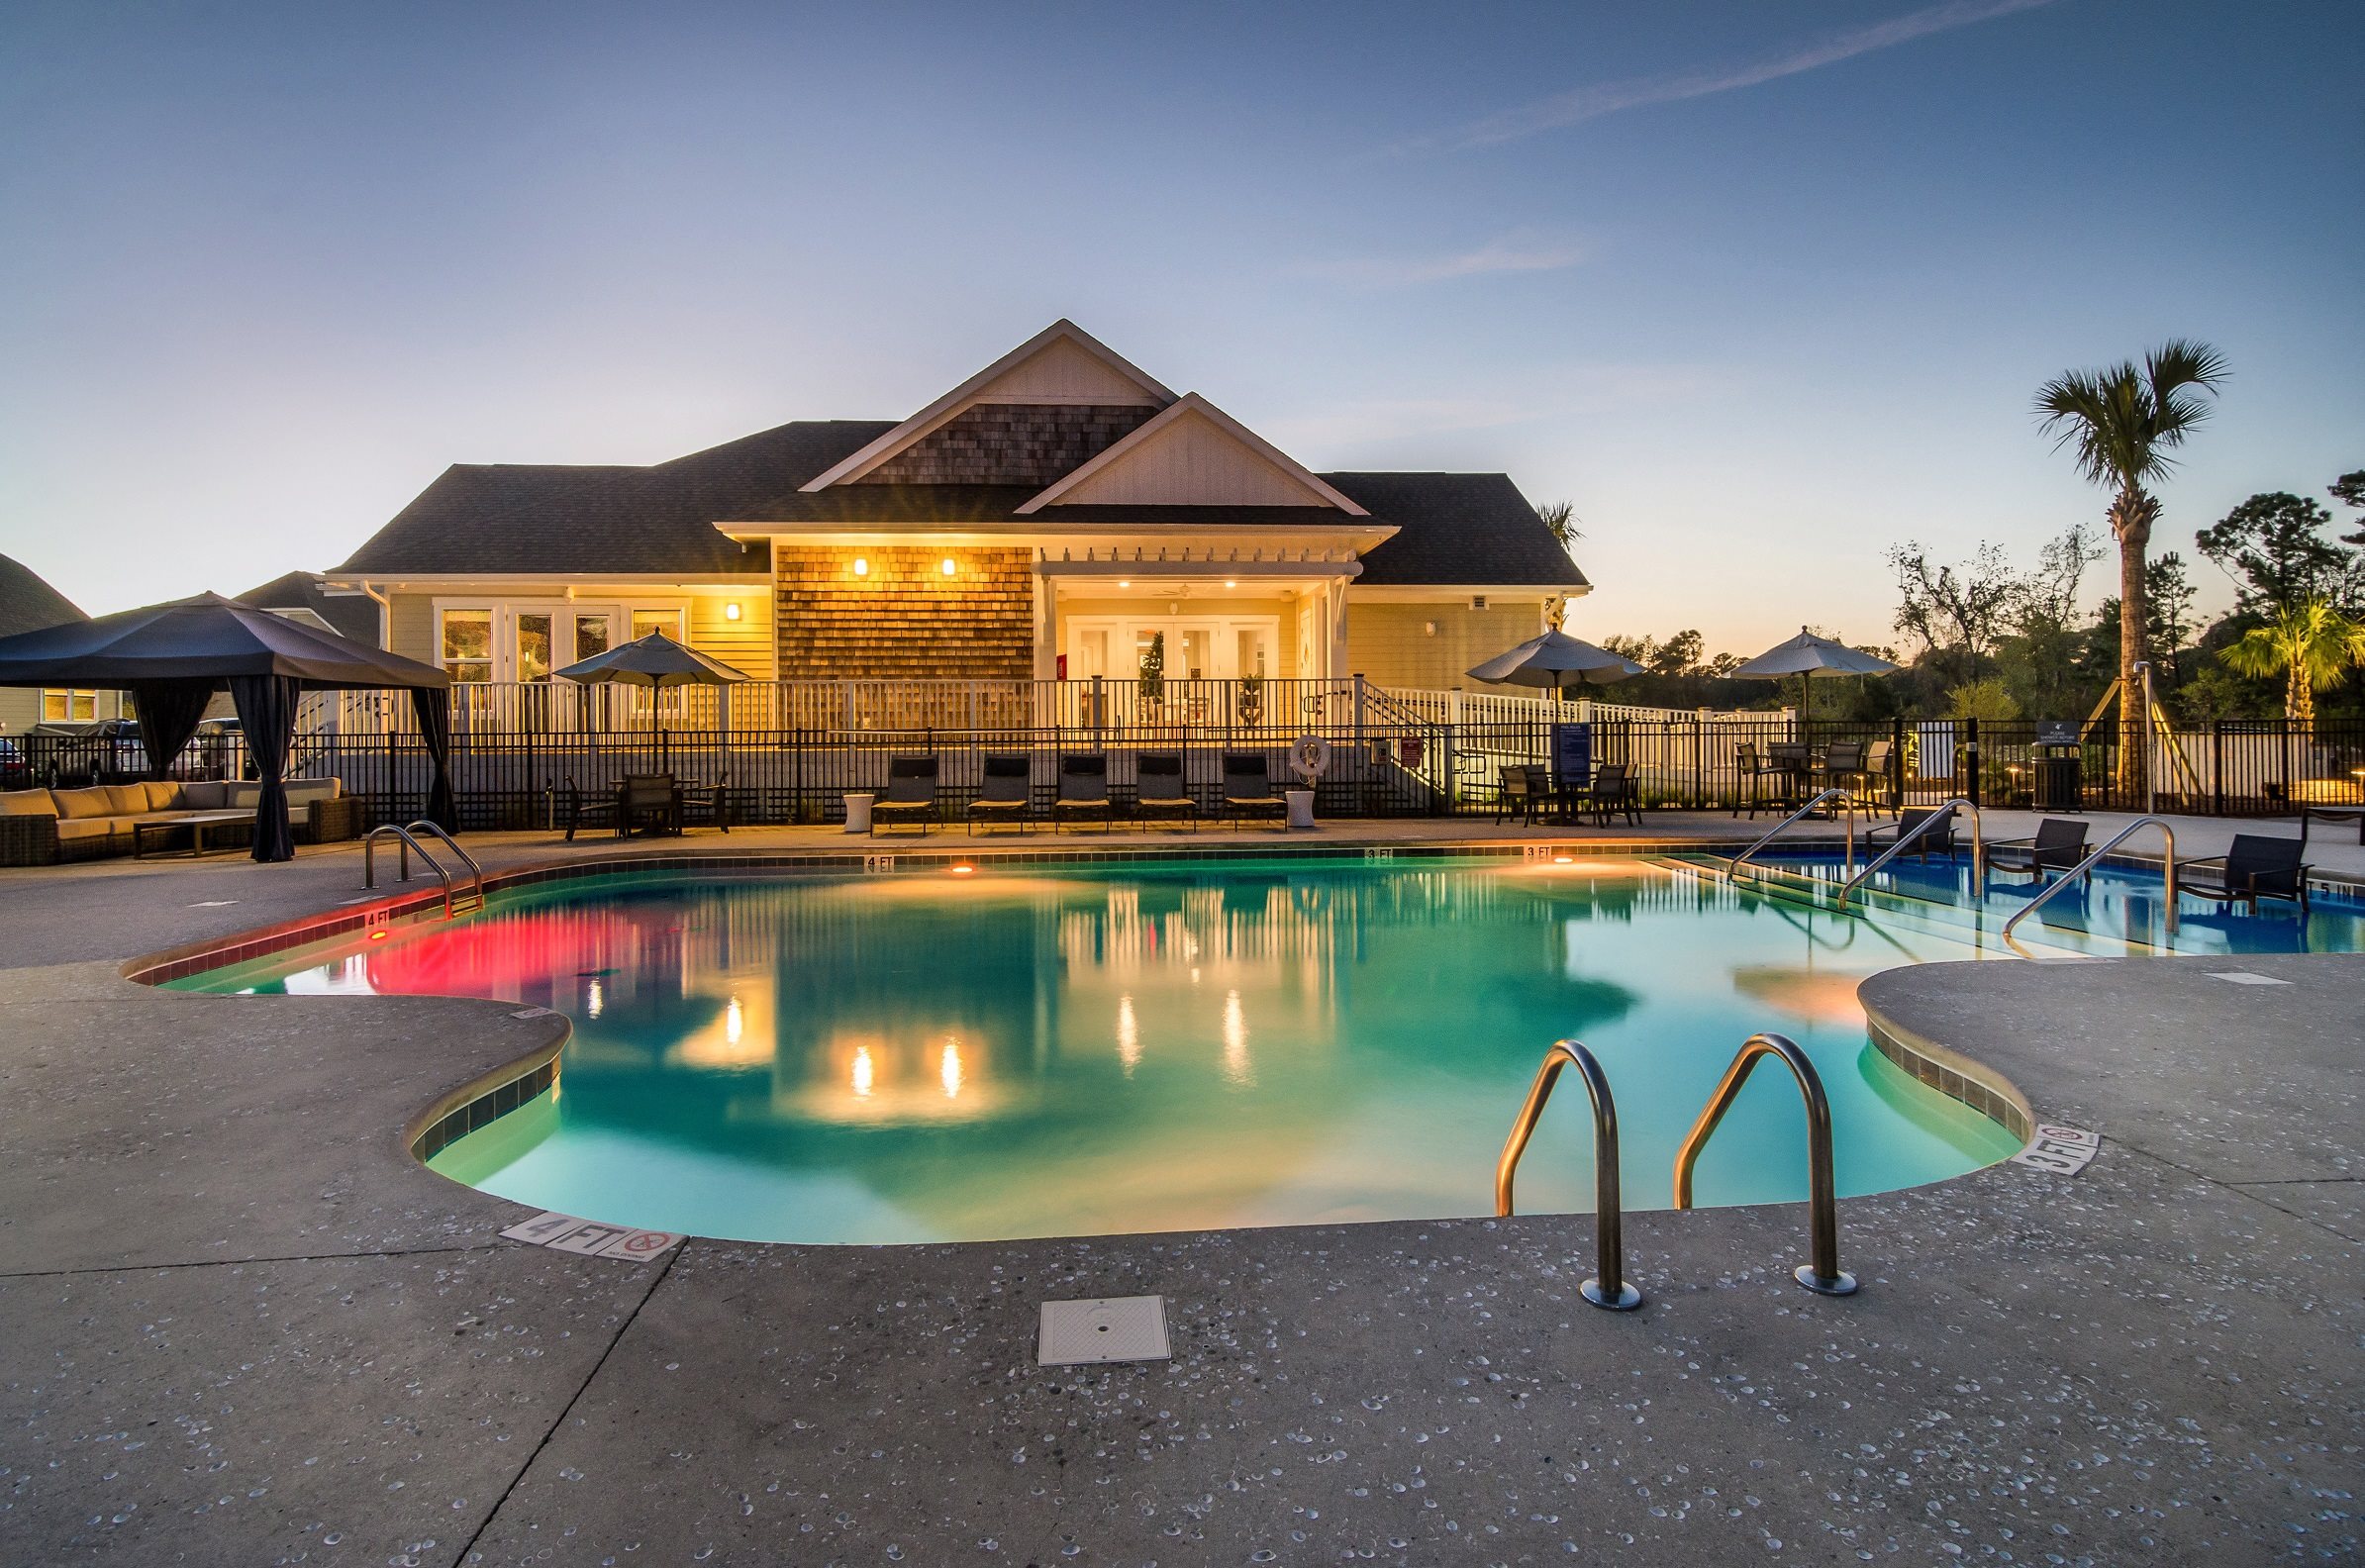 Luxury Apartments in Wilmington NC - Resort-Style Swimming Pool Surrounded by Lounge Chairs and Cabanas